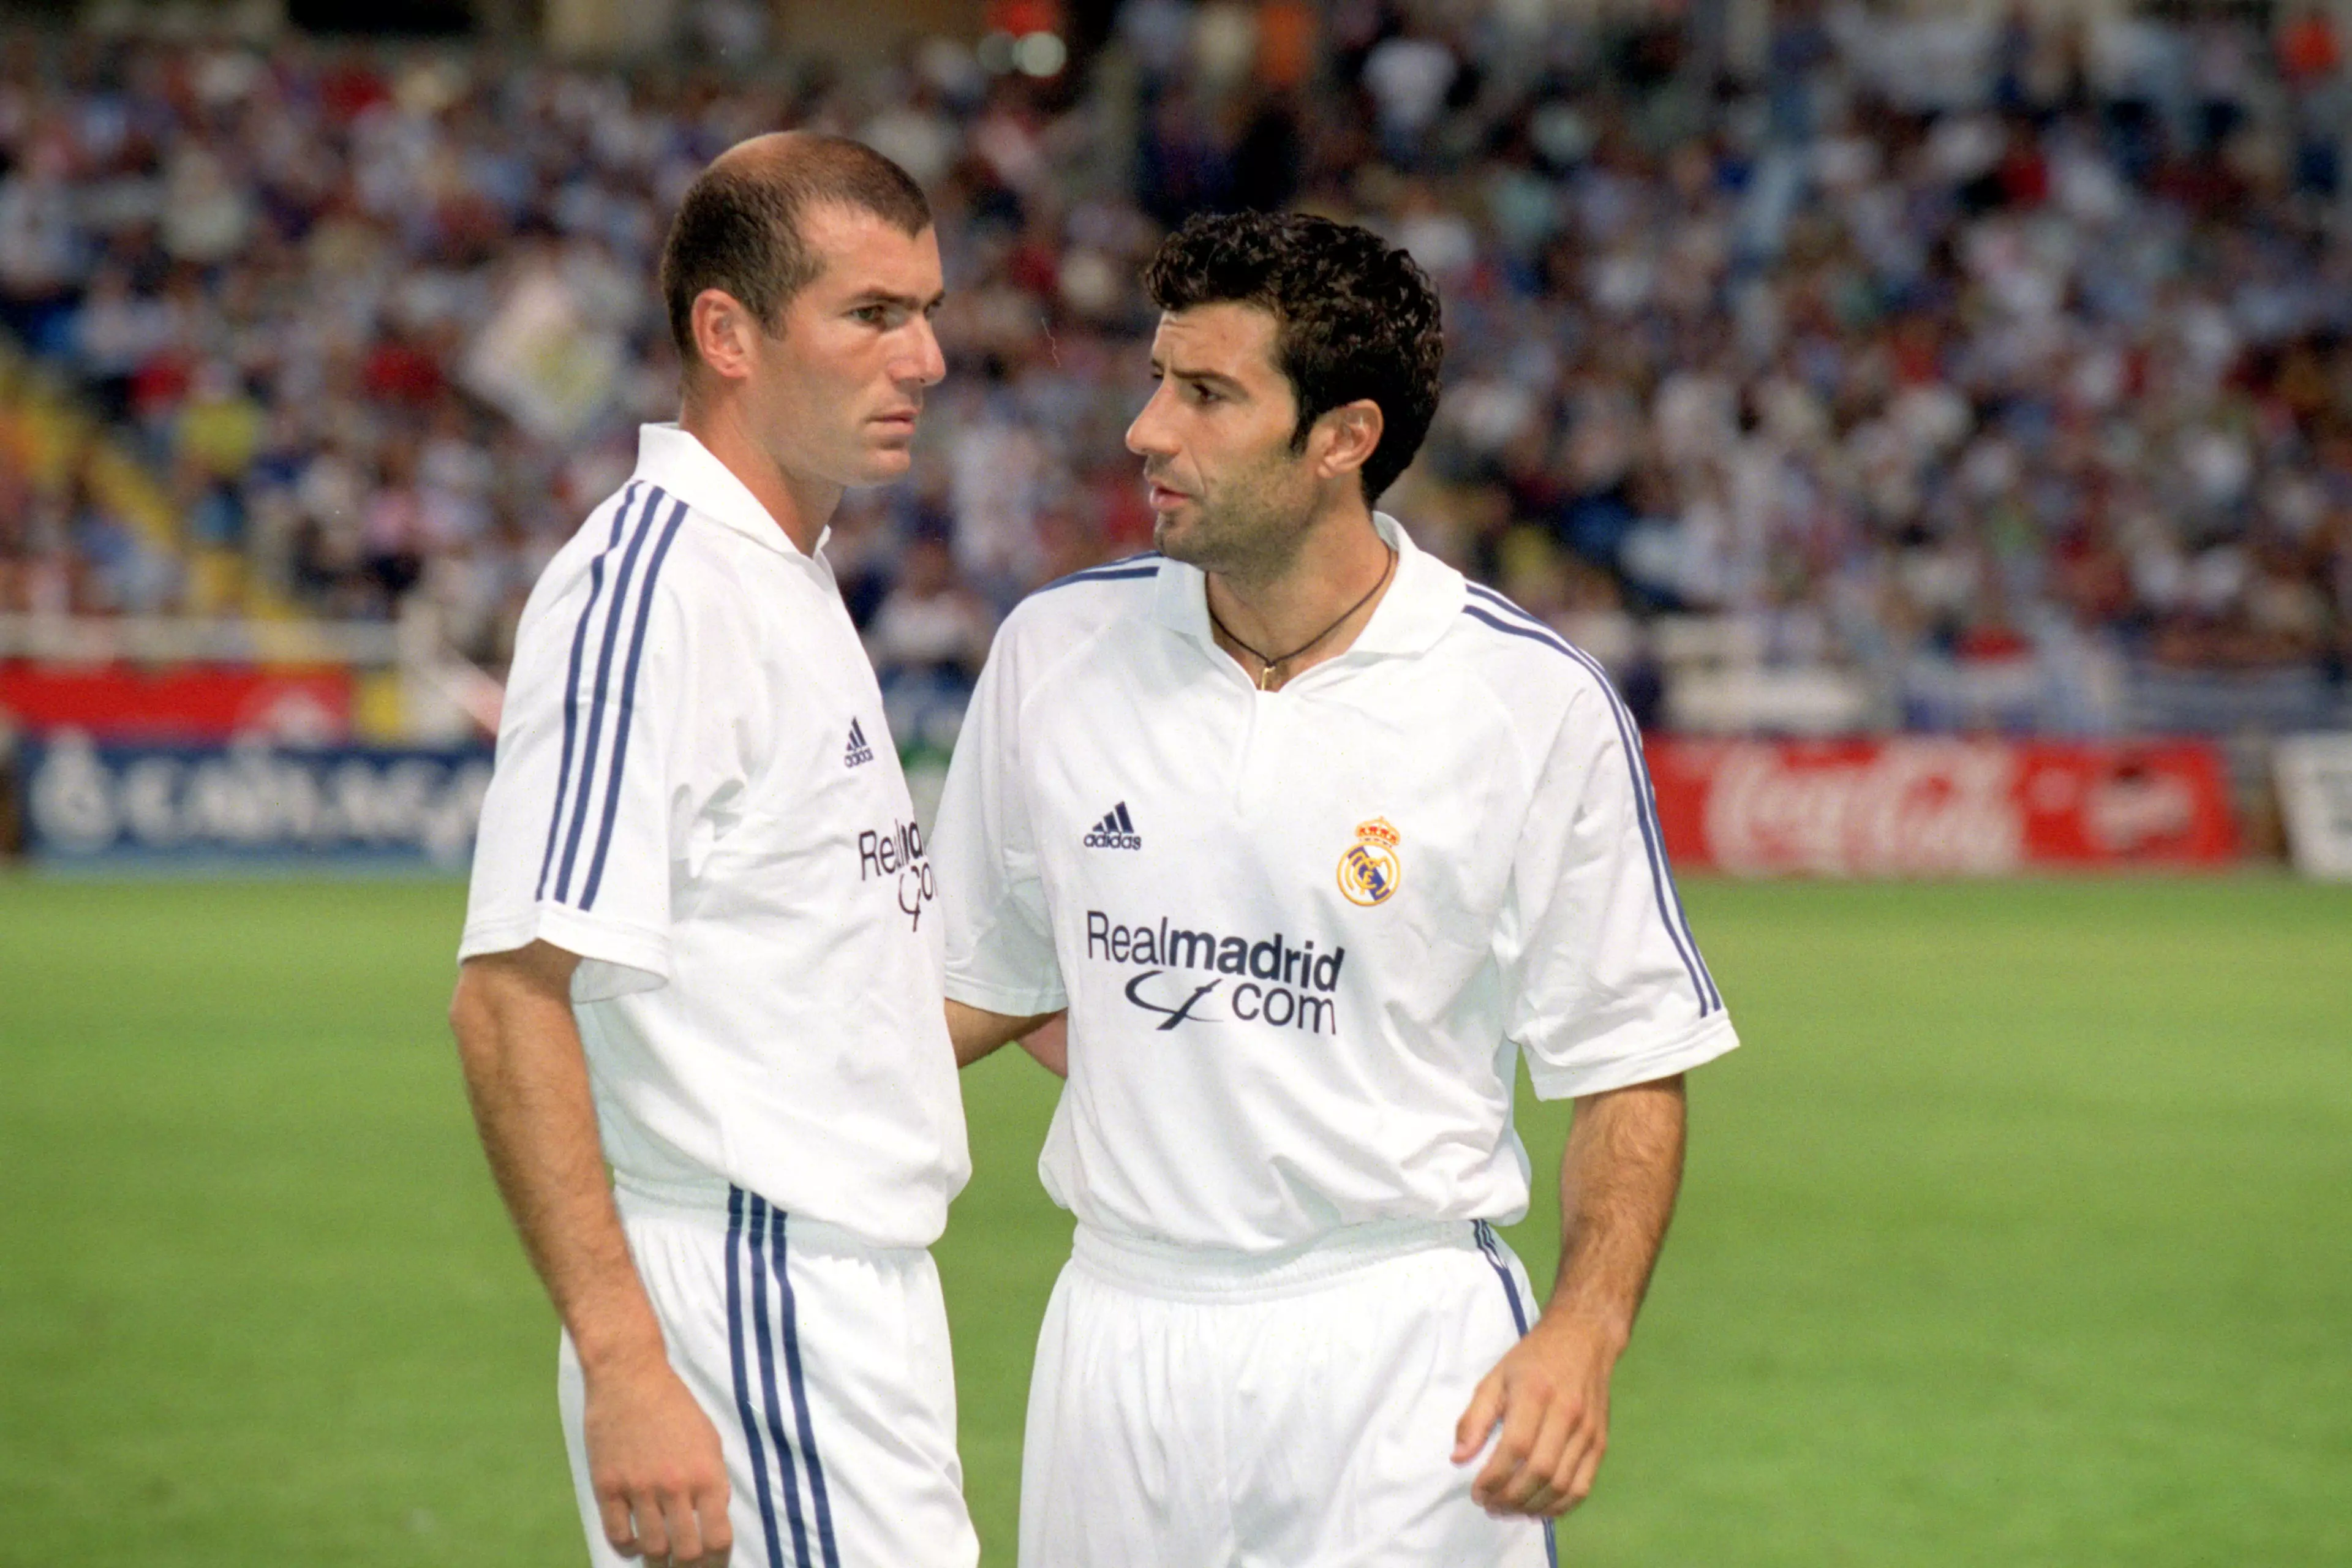 Zidane's move to Real Madrid was the most expensive transfer for eight years, when Real signed Kaka. Image: PA Images